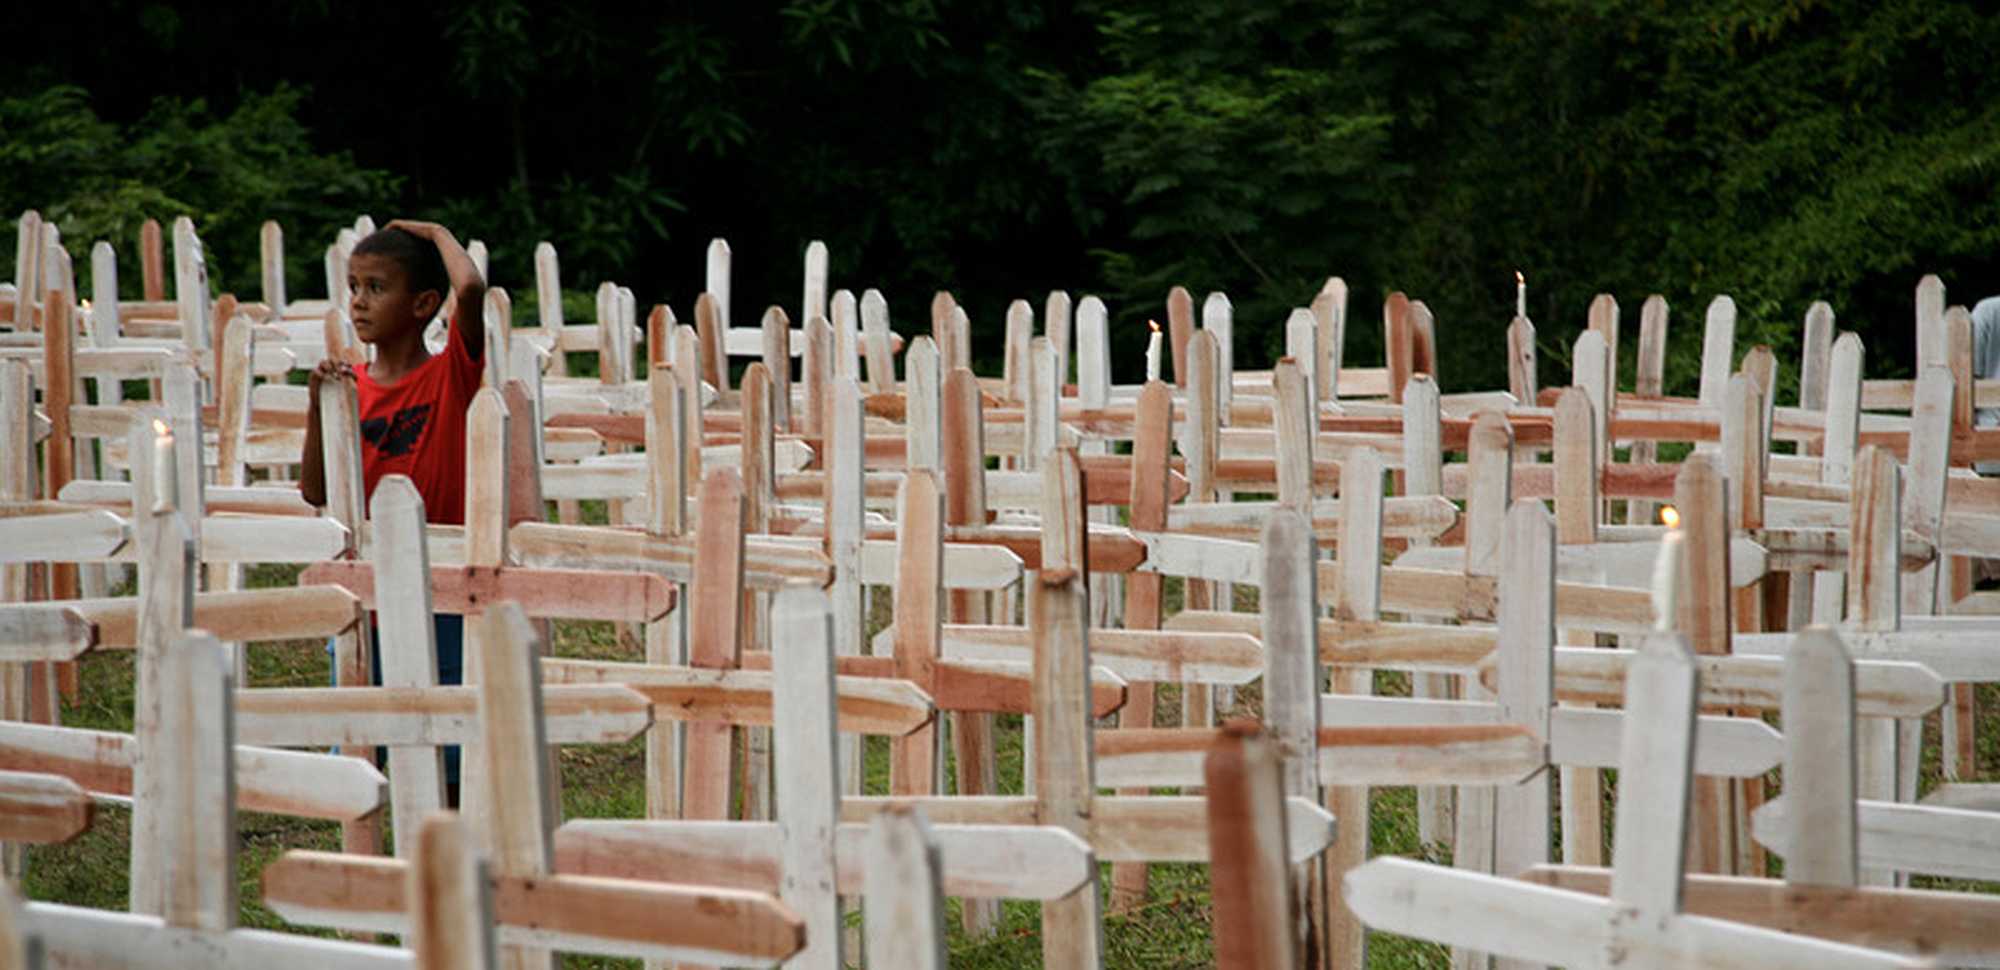 A memorial in honor of Dorothy Stang, a U.S.-born nun killed 15 years ago. Crosses represent murdered and threatened rural workers. Image by Daniel Beltrá/Greenpeace.